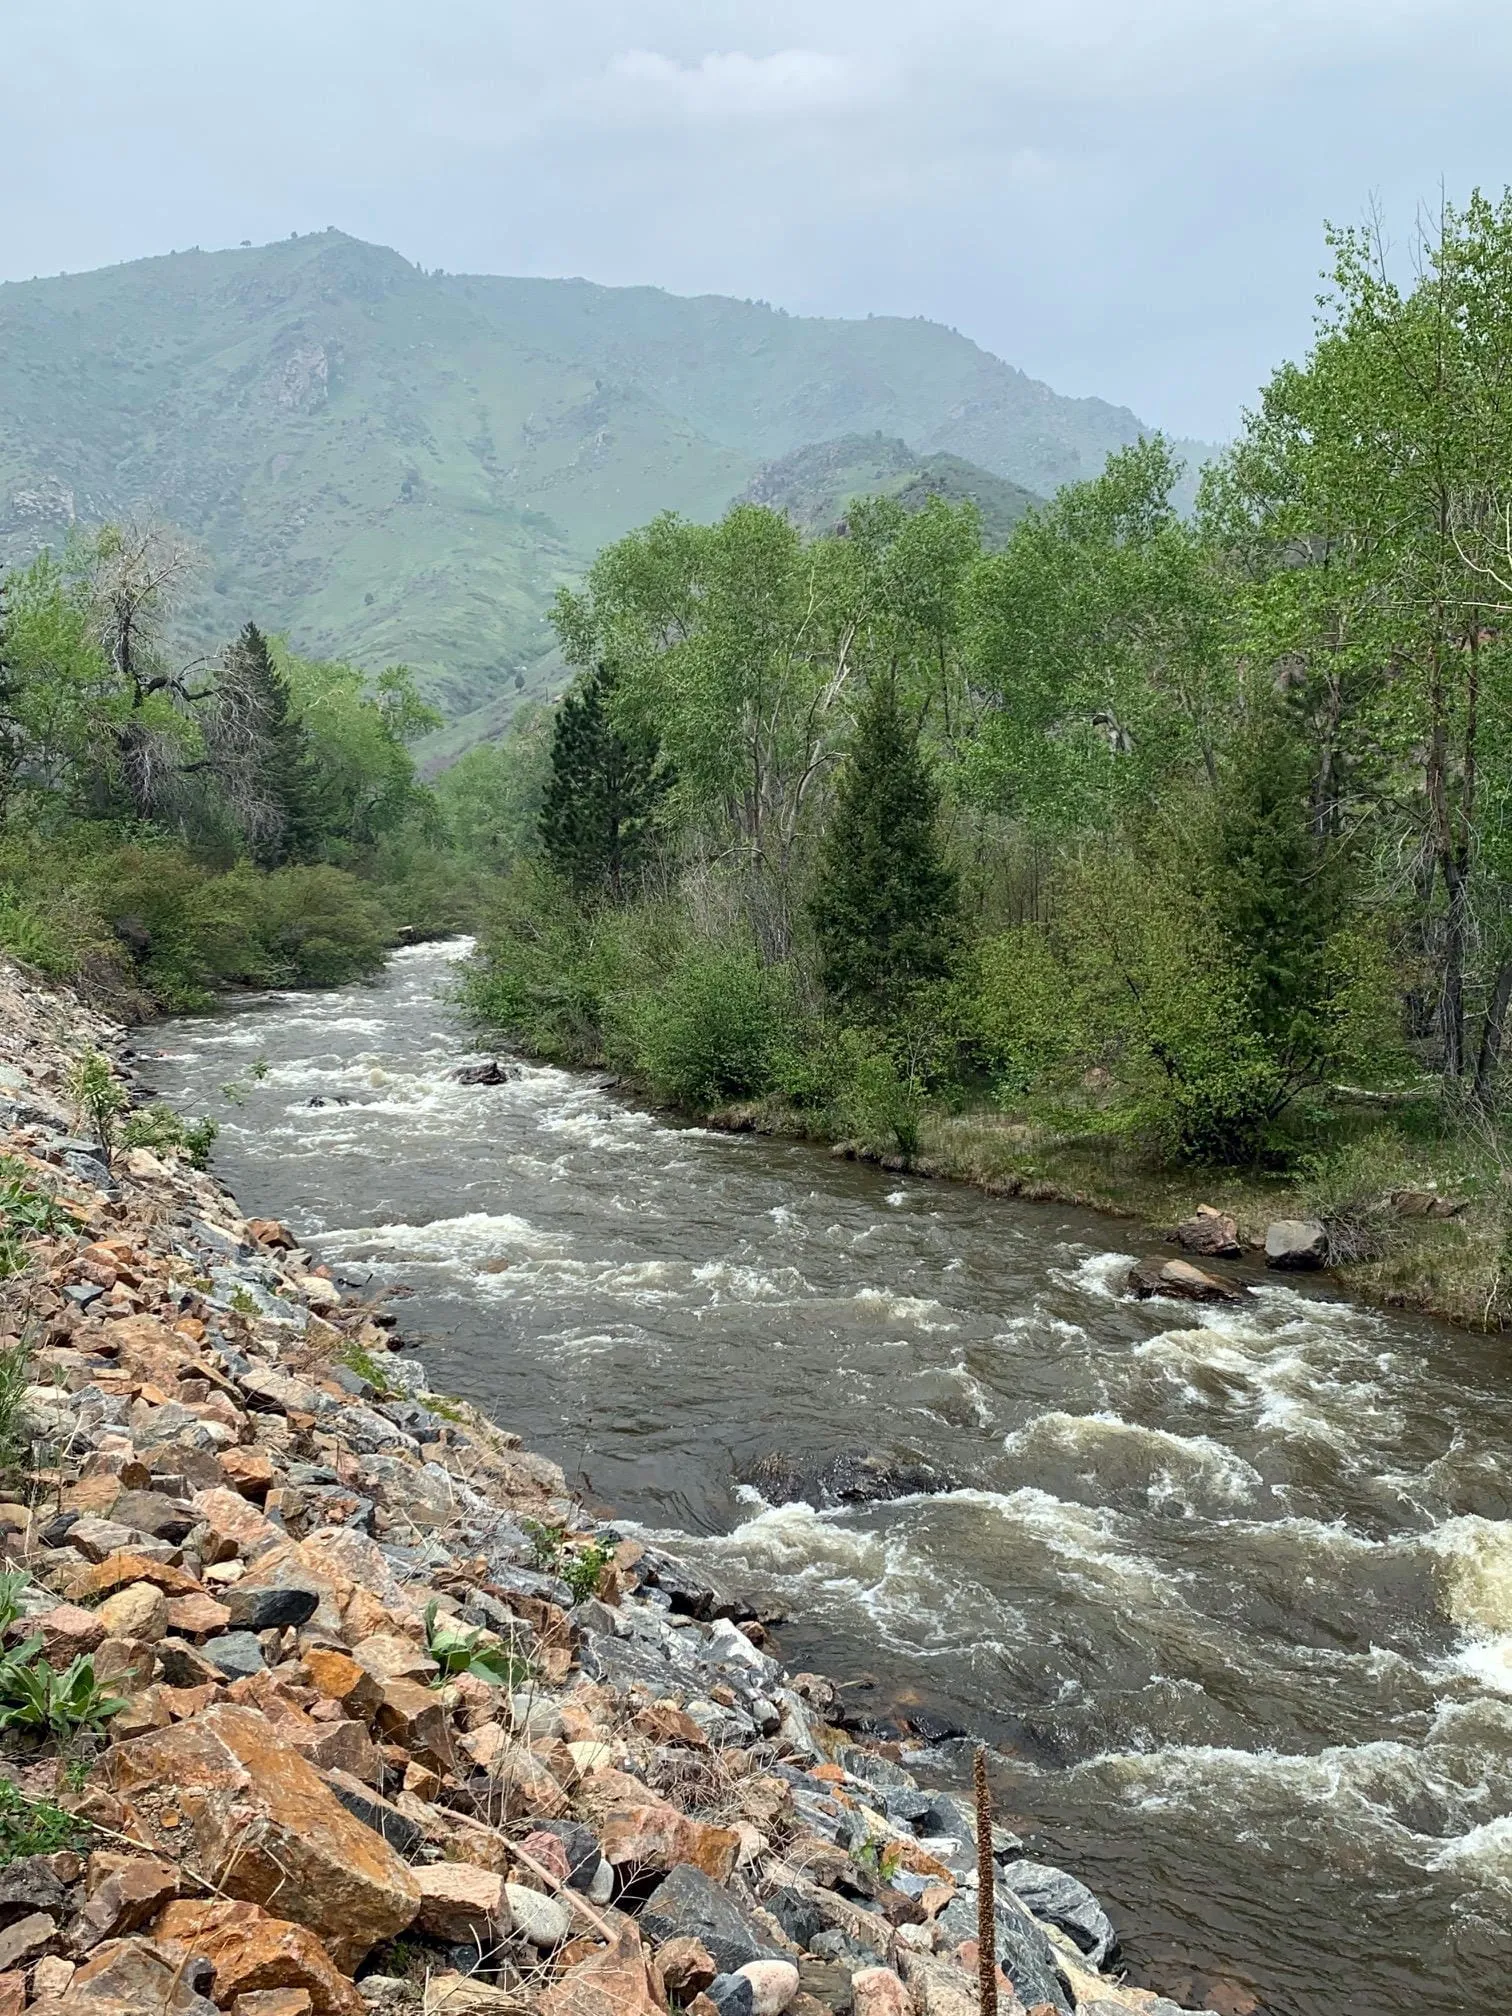 Clear Creek with some whitewater - rocks on near bank and trees on far bank - mountain in background